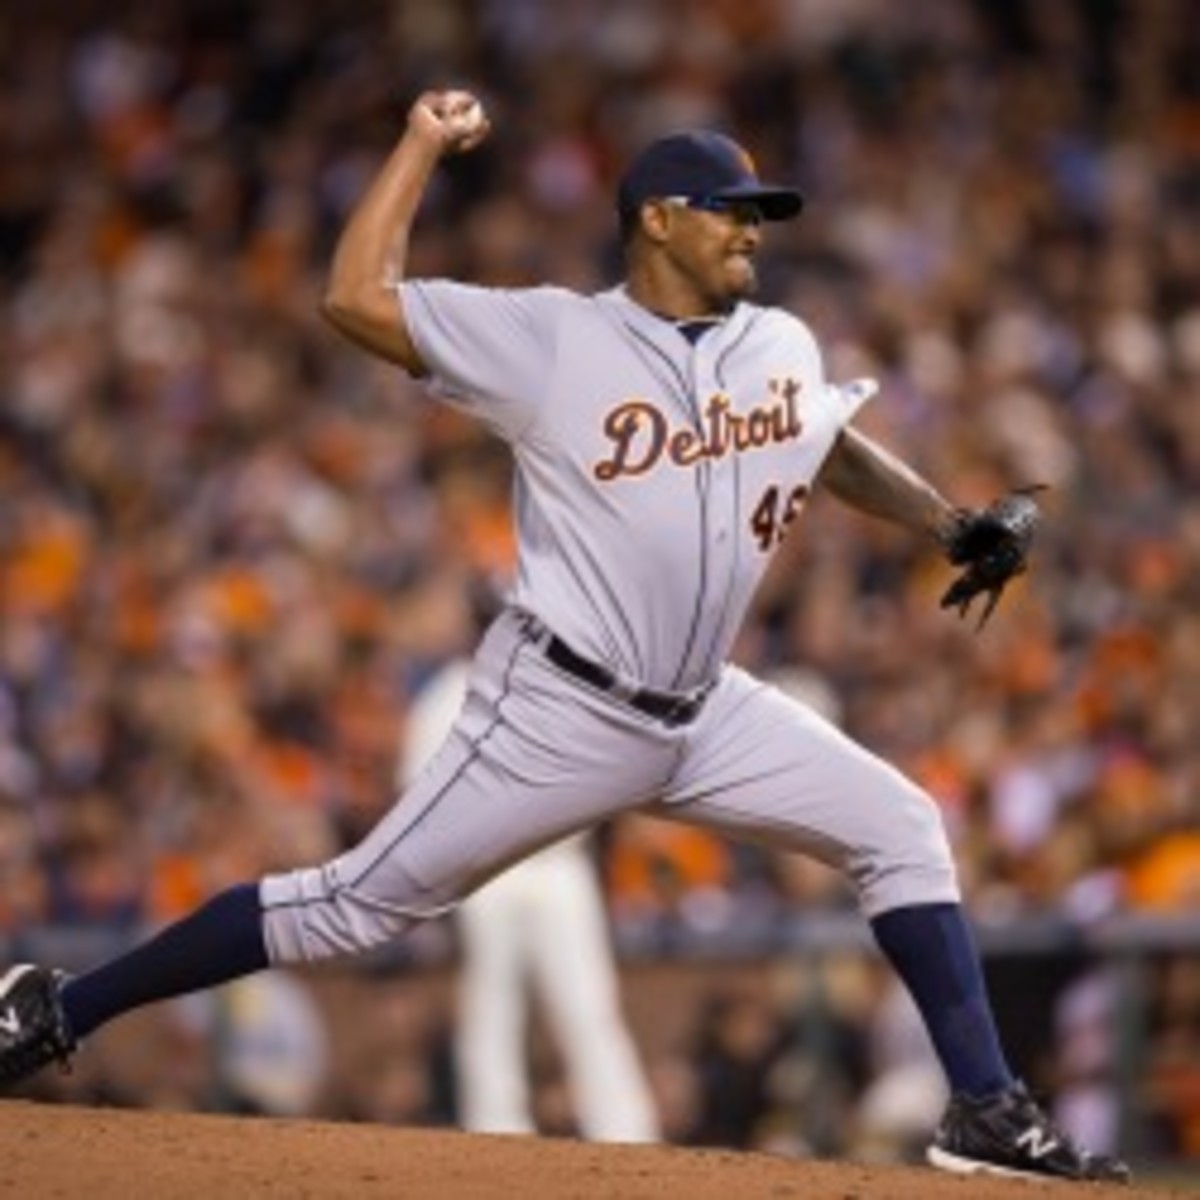 The Tigers will have Jose Valverde closing games once again. (Brad Mangin/MLB/Getty Images)